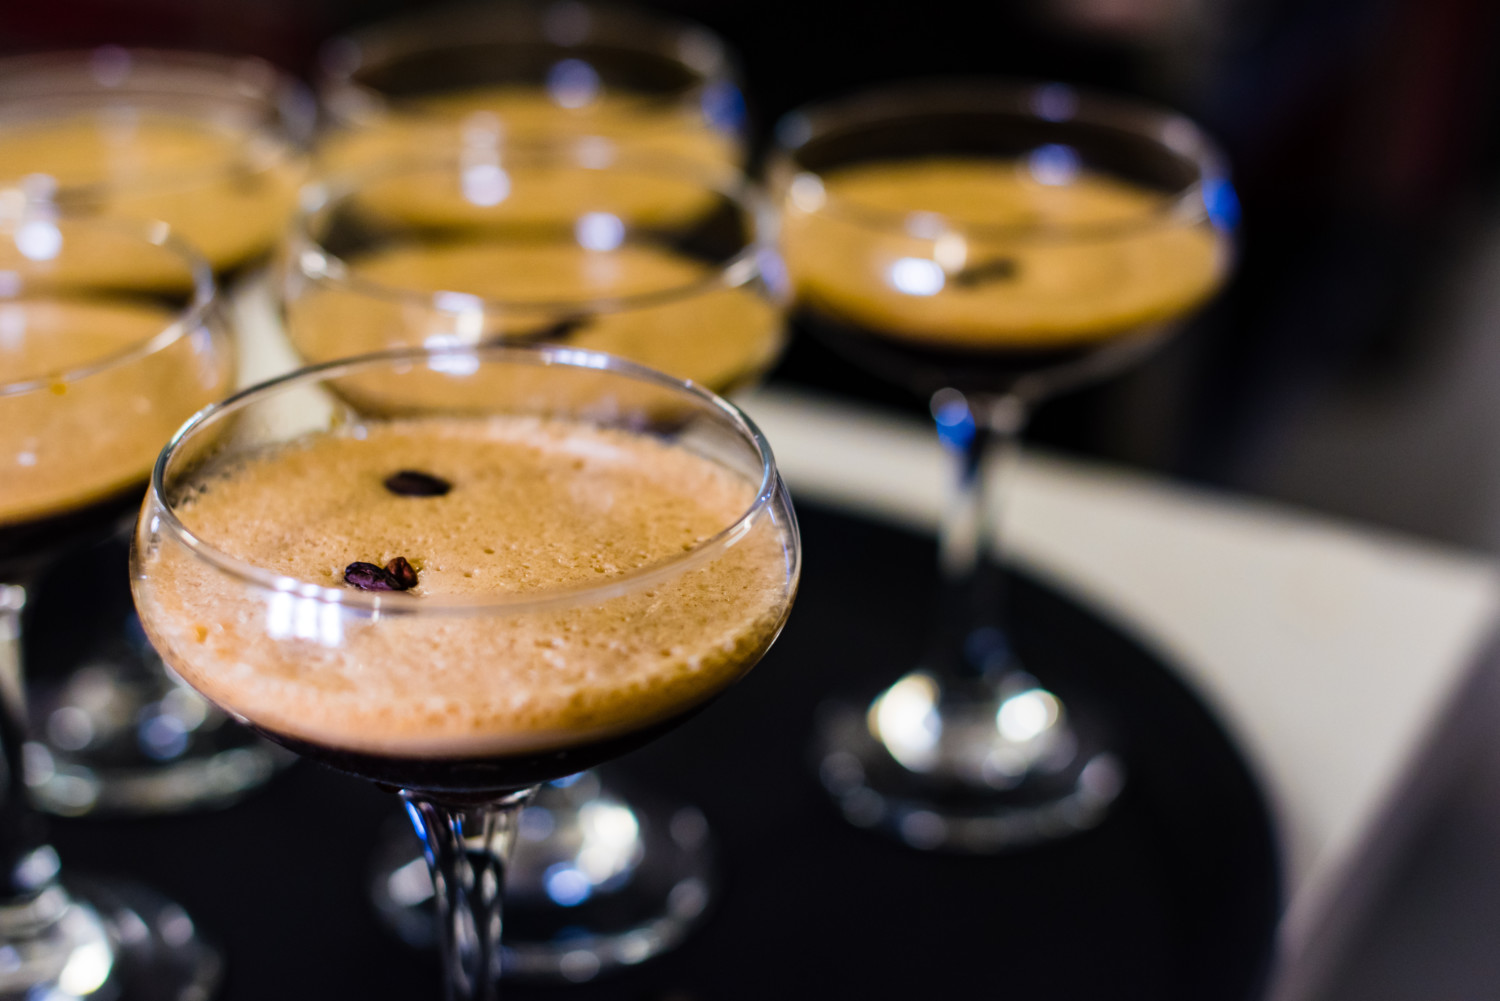 espresso martini - one of the most popular cocktails in the world